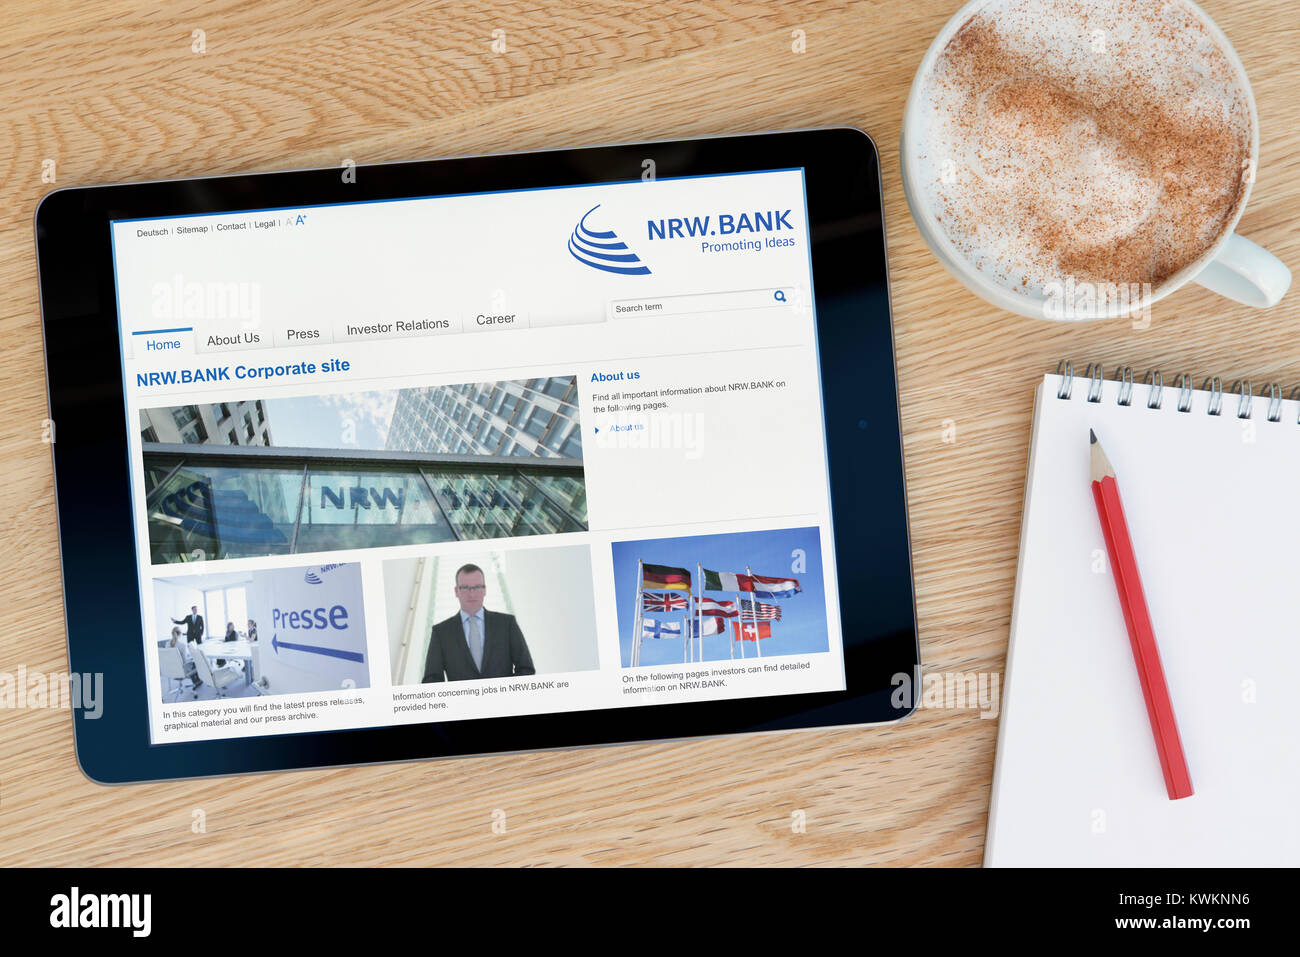 The NRW.BANK website on an iPad tablet device, resting on a wooden table beside a notepad, pencil and cup of coffee (Editorial only) Stock Photo